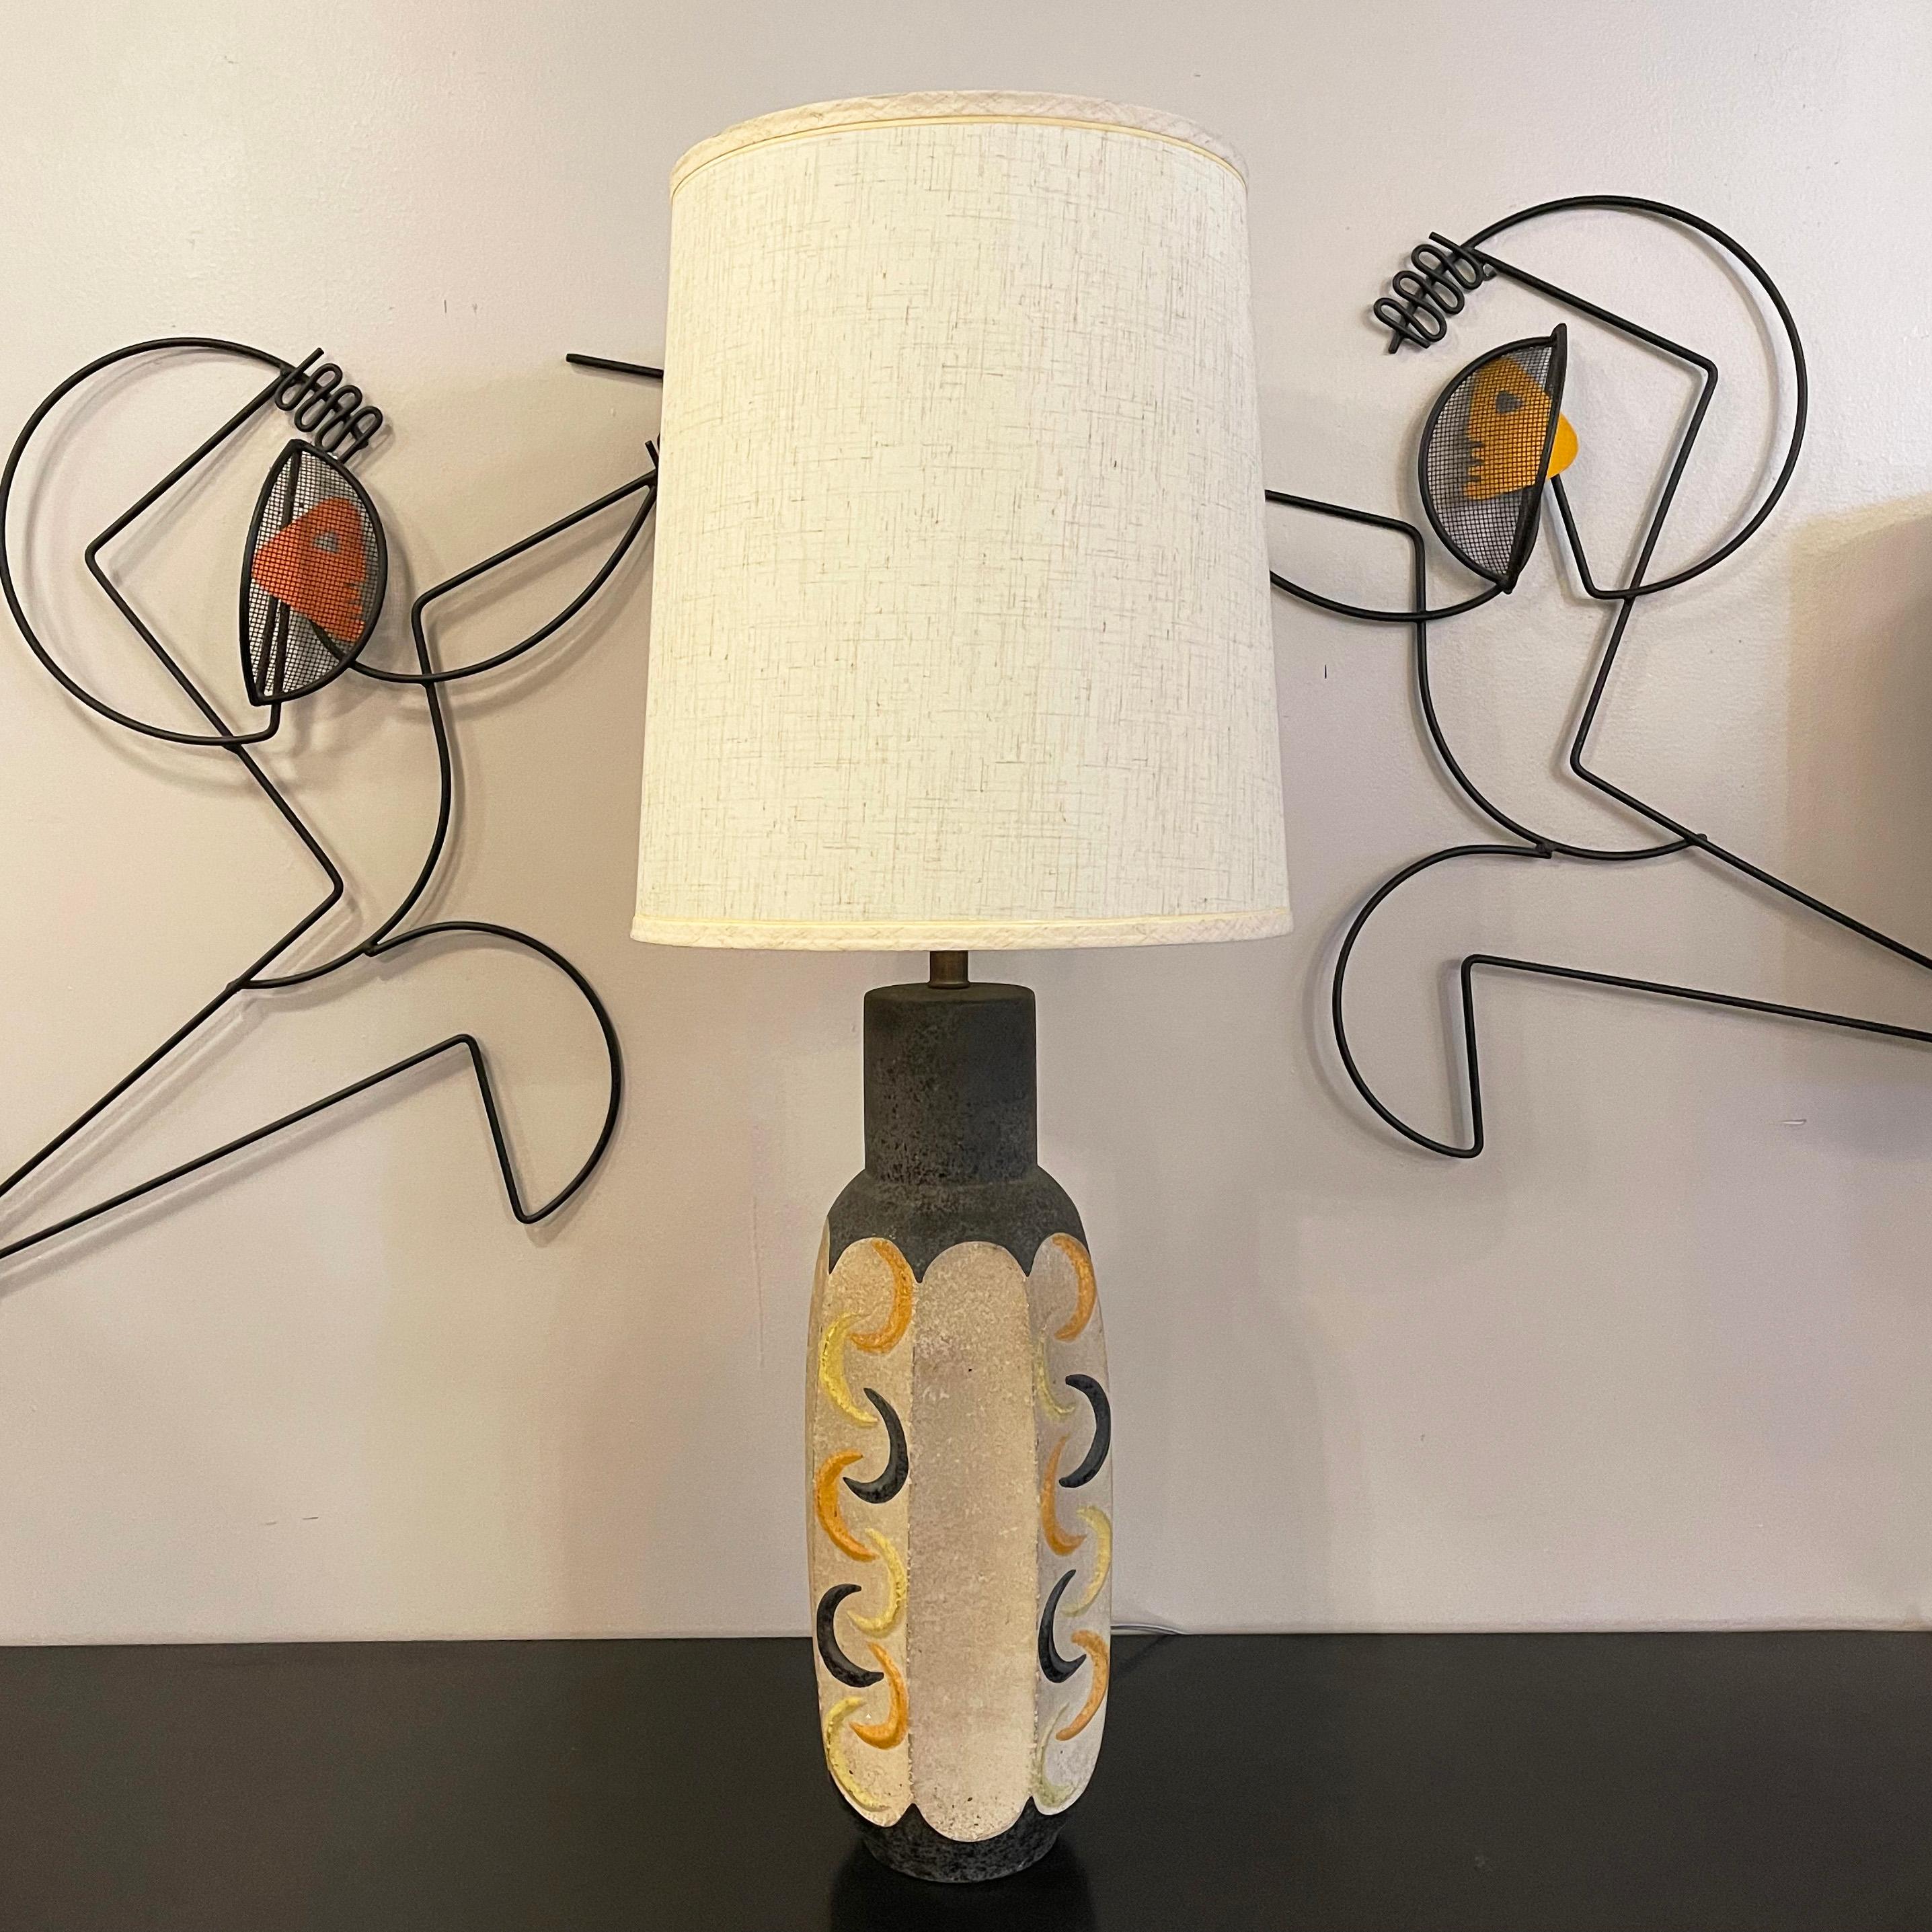 Mid century modern, studio art pottery table lamp by Tye Of California features a faceted body with yellow, orange and gray crescent shapes against a cream background. The height of the ceramic body is 20 inches and the height top of the socket is